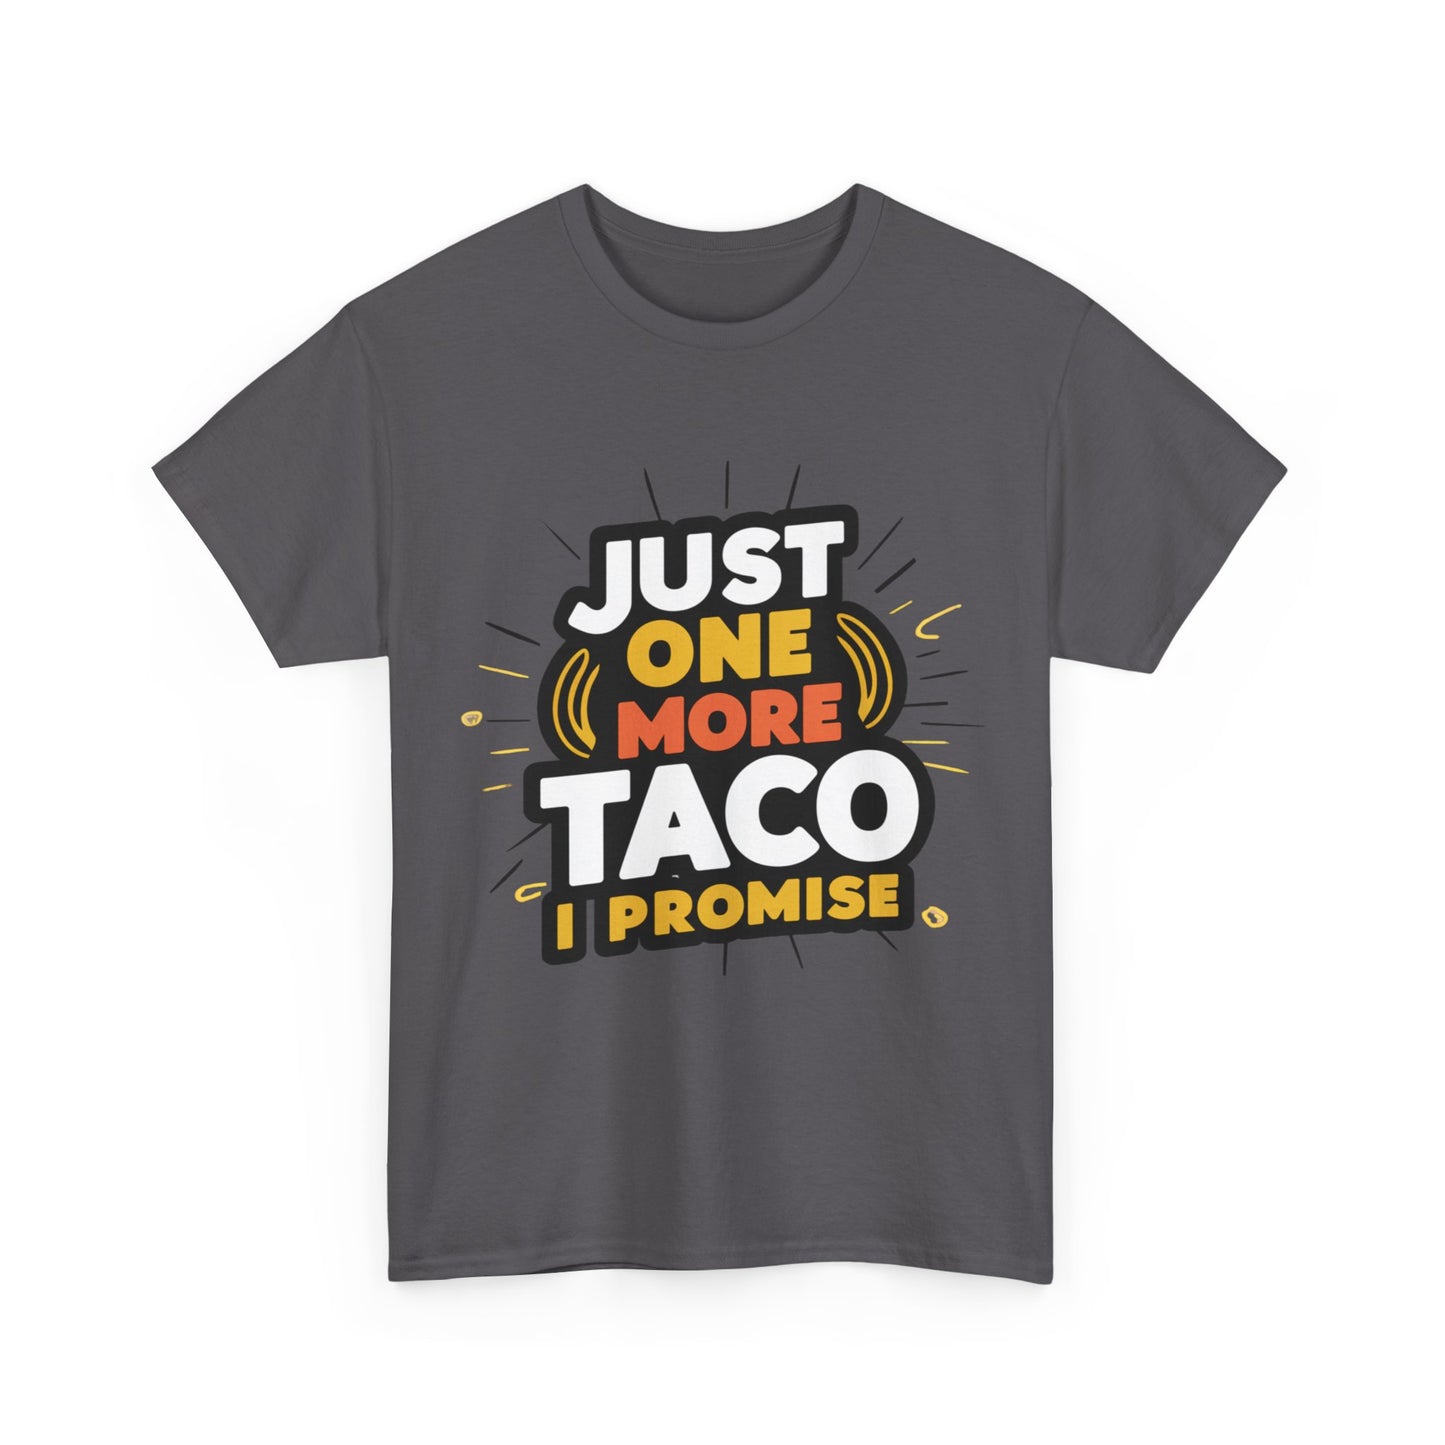 Just One More Taco I Promise Mexican Food Graphic Unisex Heavy Cotton Tee Cotton Funny Humorous Graphic Soft Premium Unisex Men Women Charcoal T-shirt Birthday Gift-18